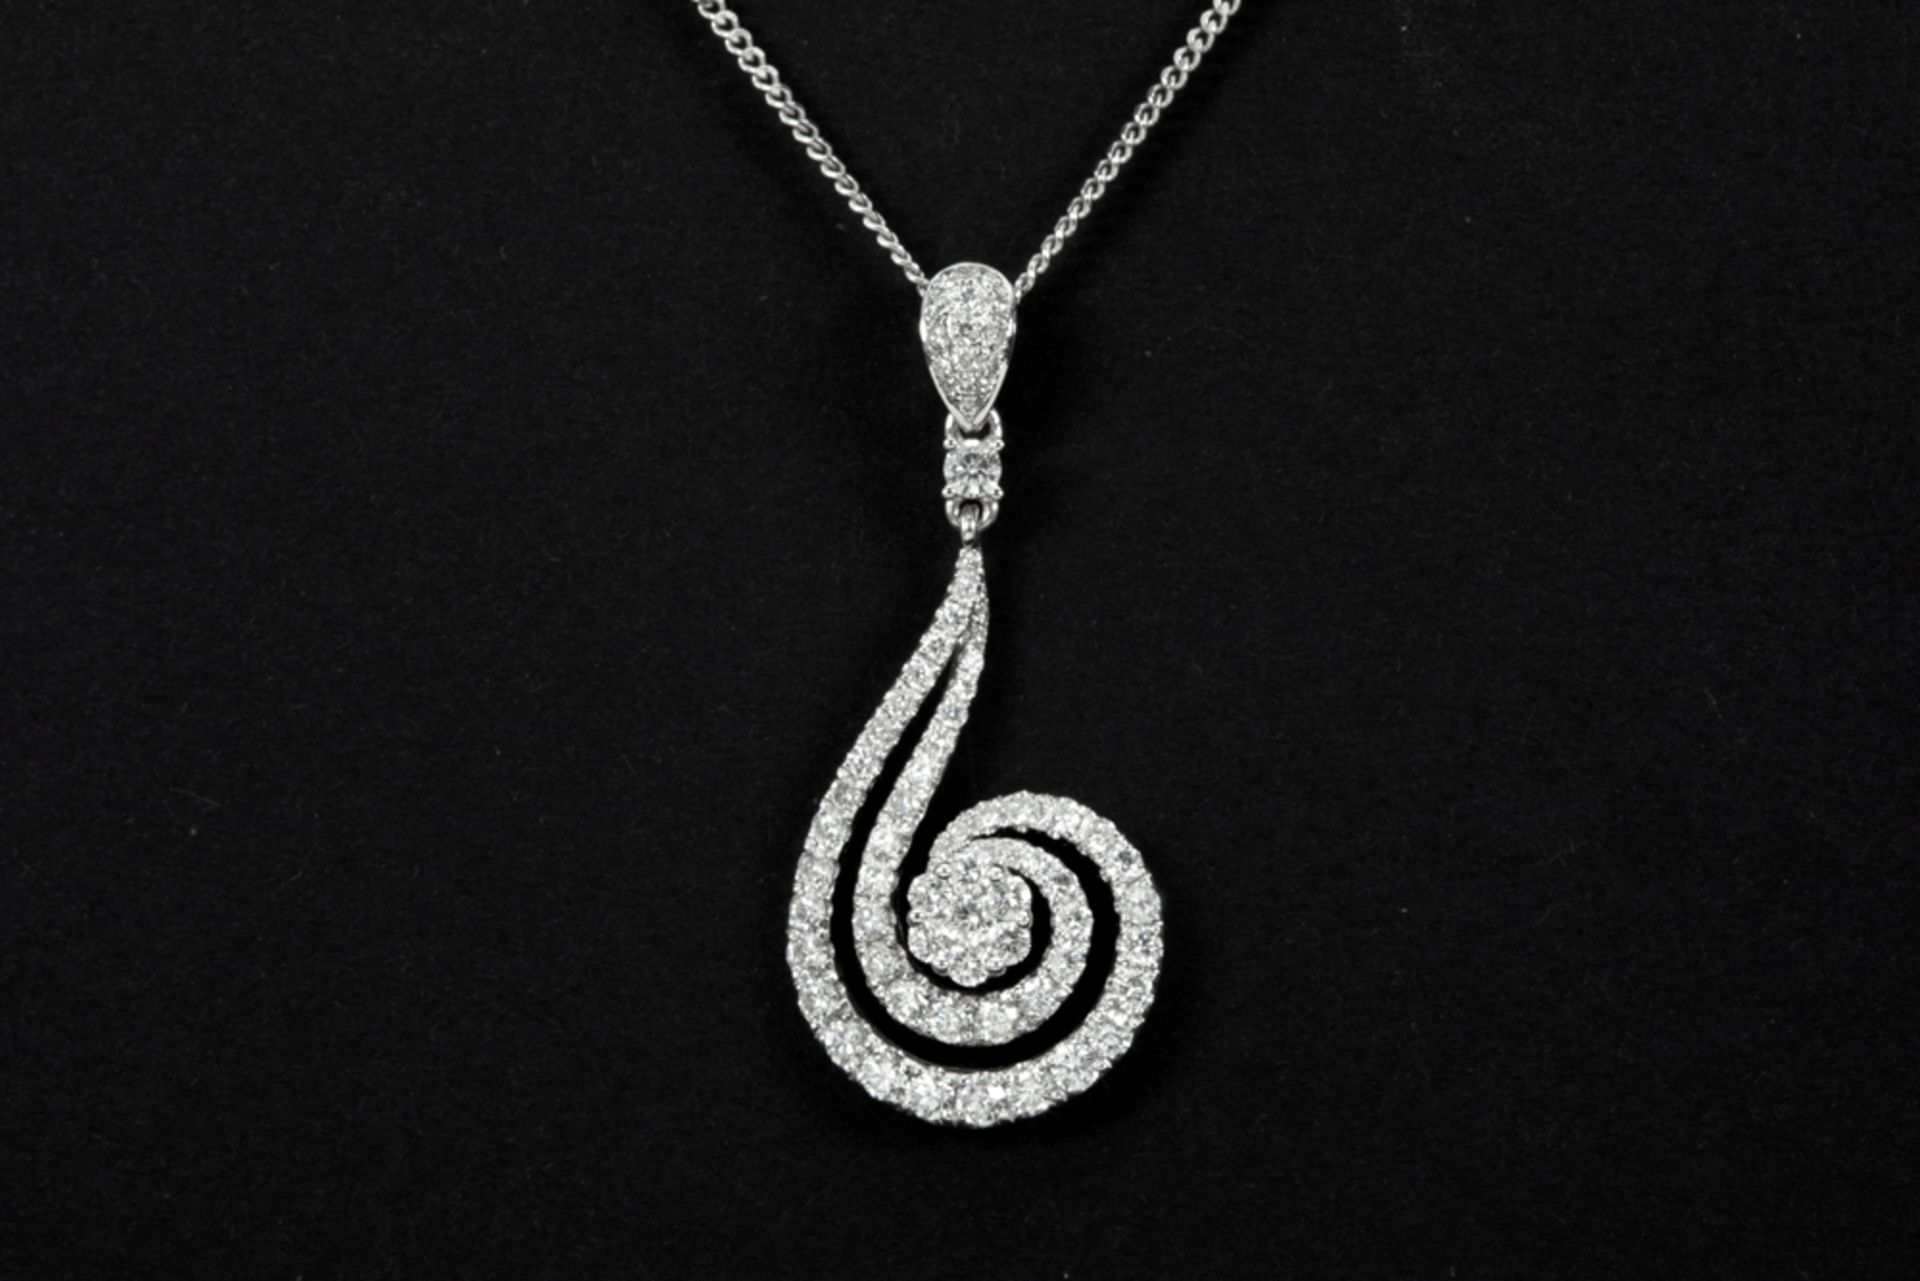 spiral shaped pendant in white gold (18 carat) with more then 1,30 carat of high quality brilliant